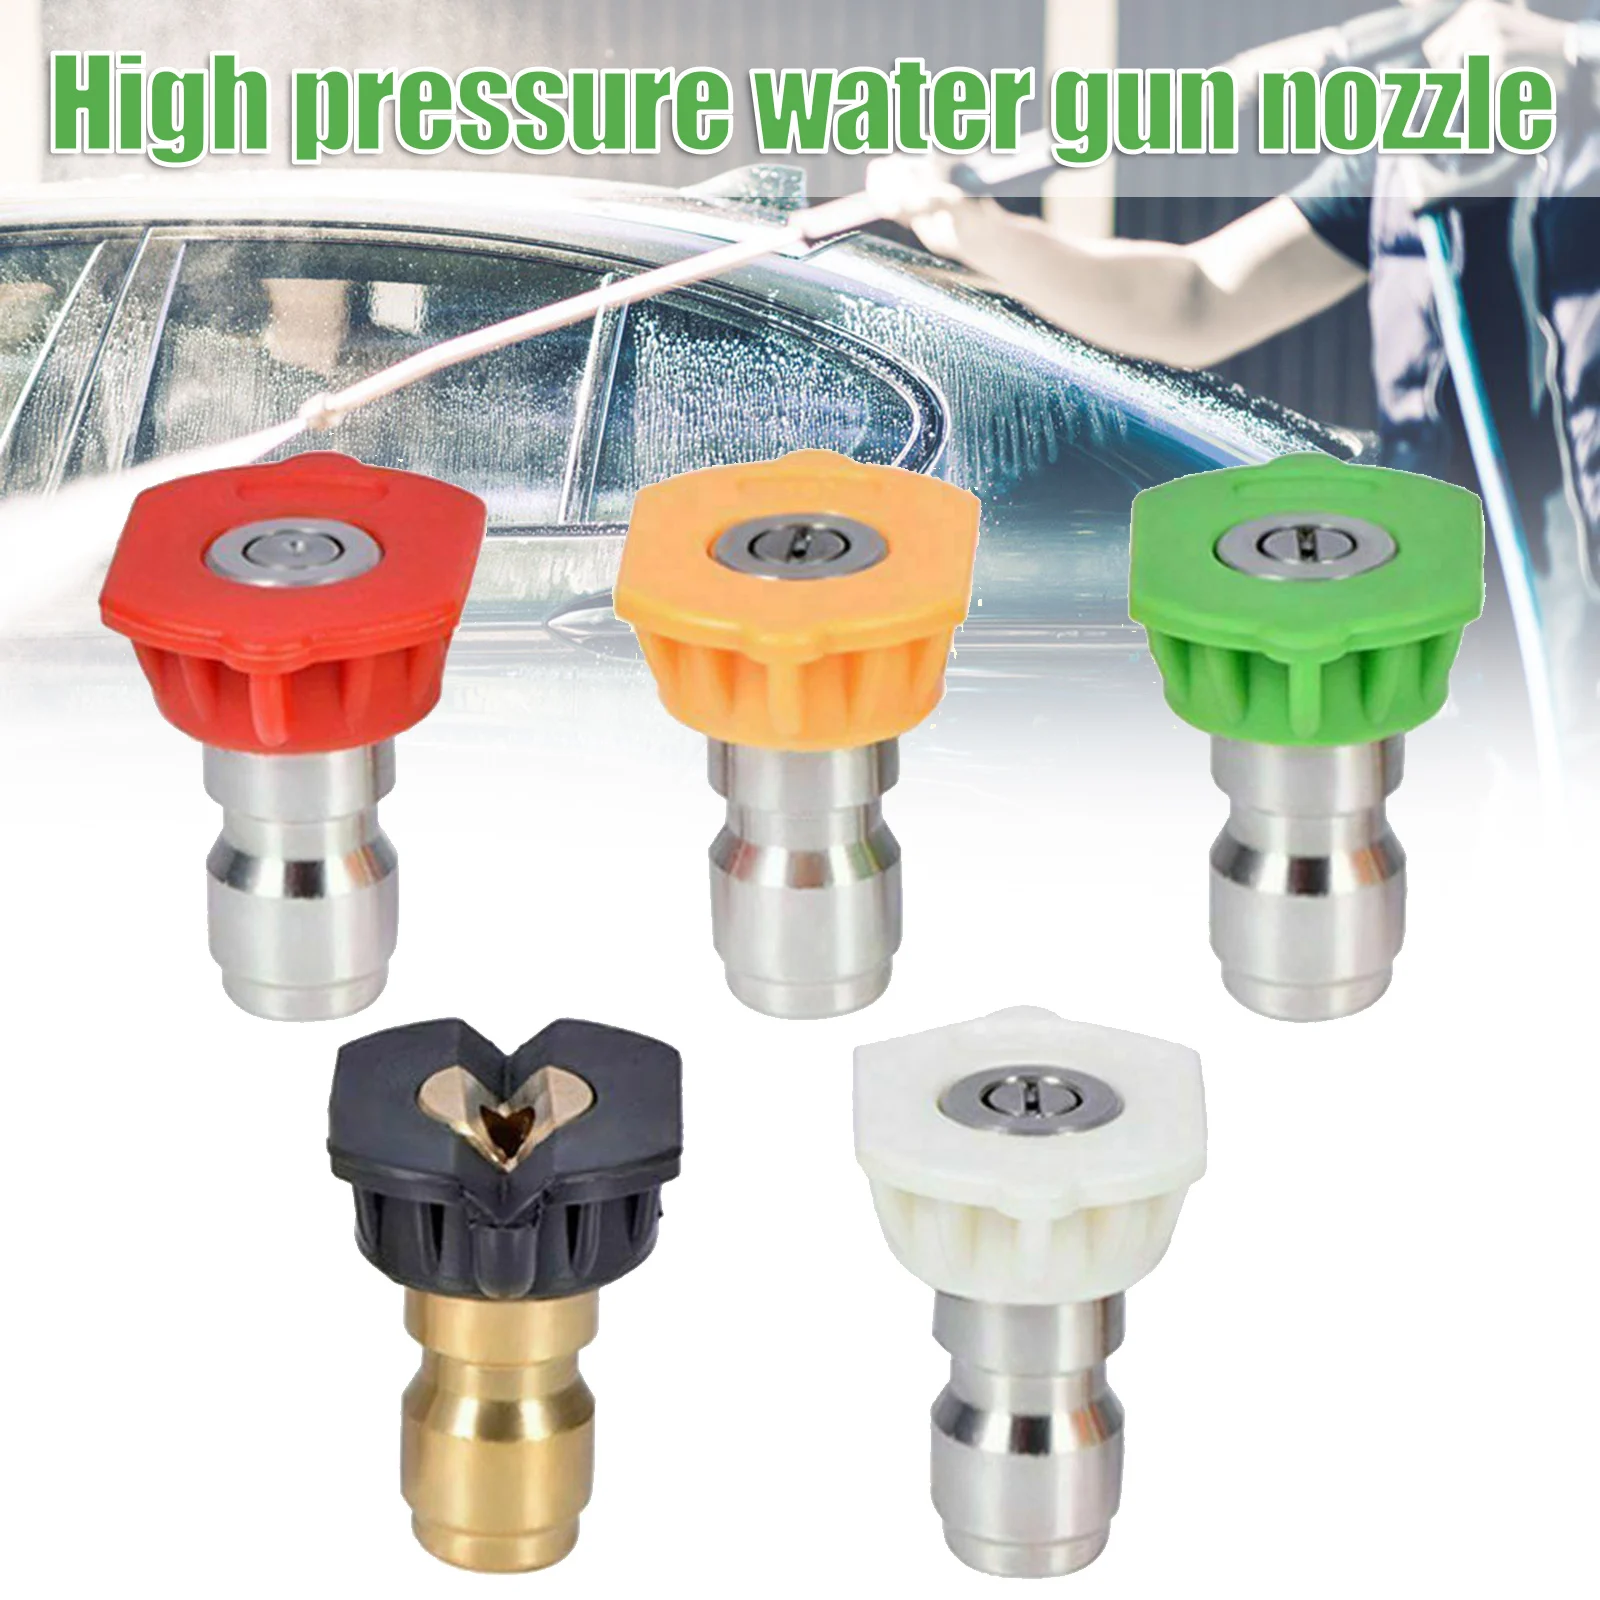 

Pressure Washer Nozzle Pack of 5 Power Washer Soap Nozzle Tips Multiple Degrees Quick Connect Design Gardening Tool TN88